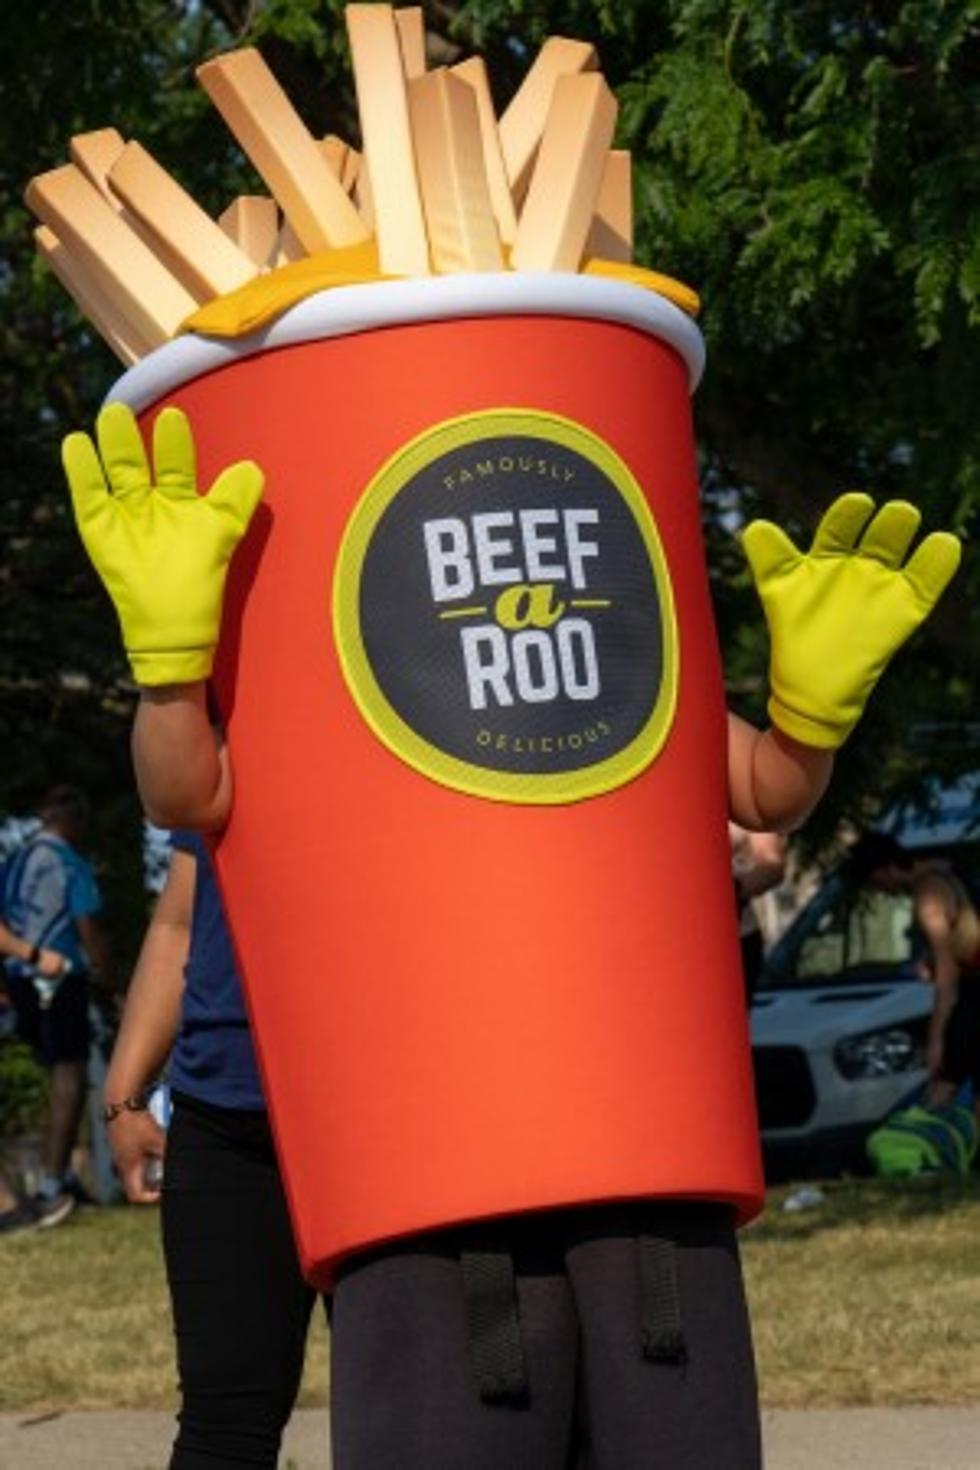 Serious Illinois Food Question: What Happened To Beef-A-Roo’s Fries?